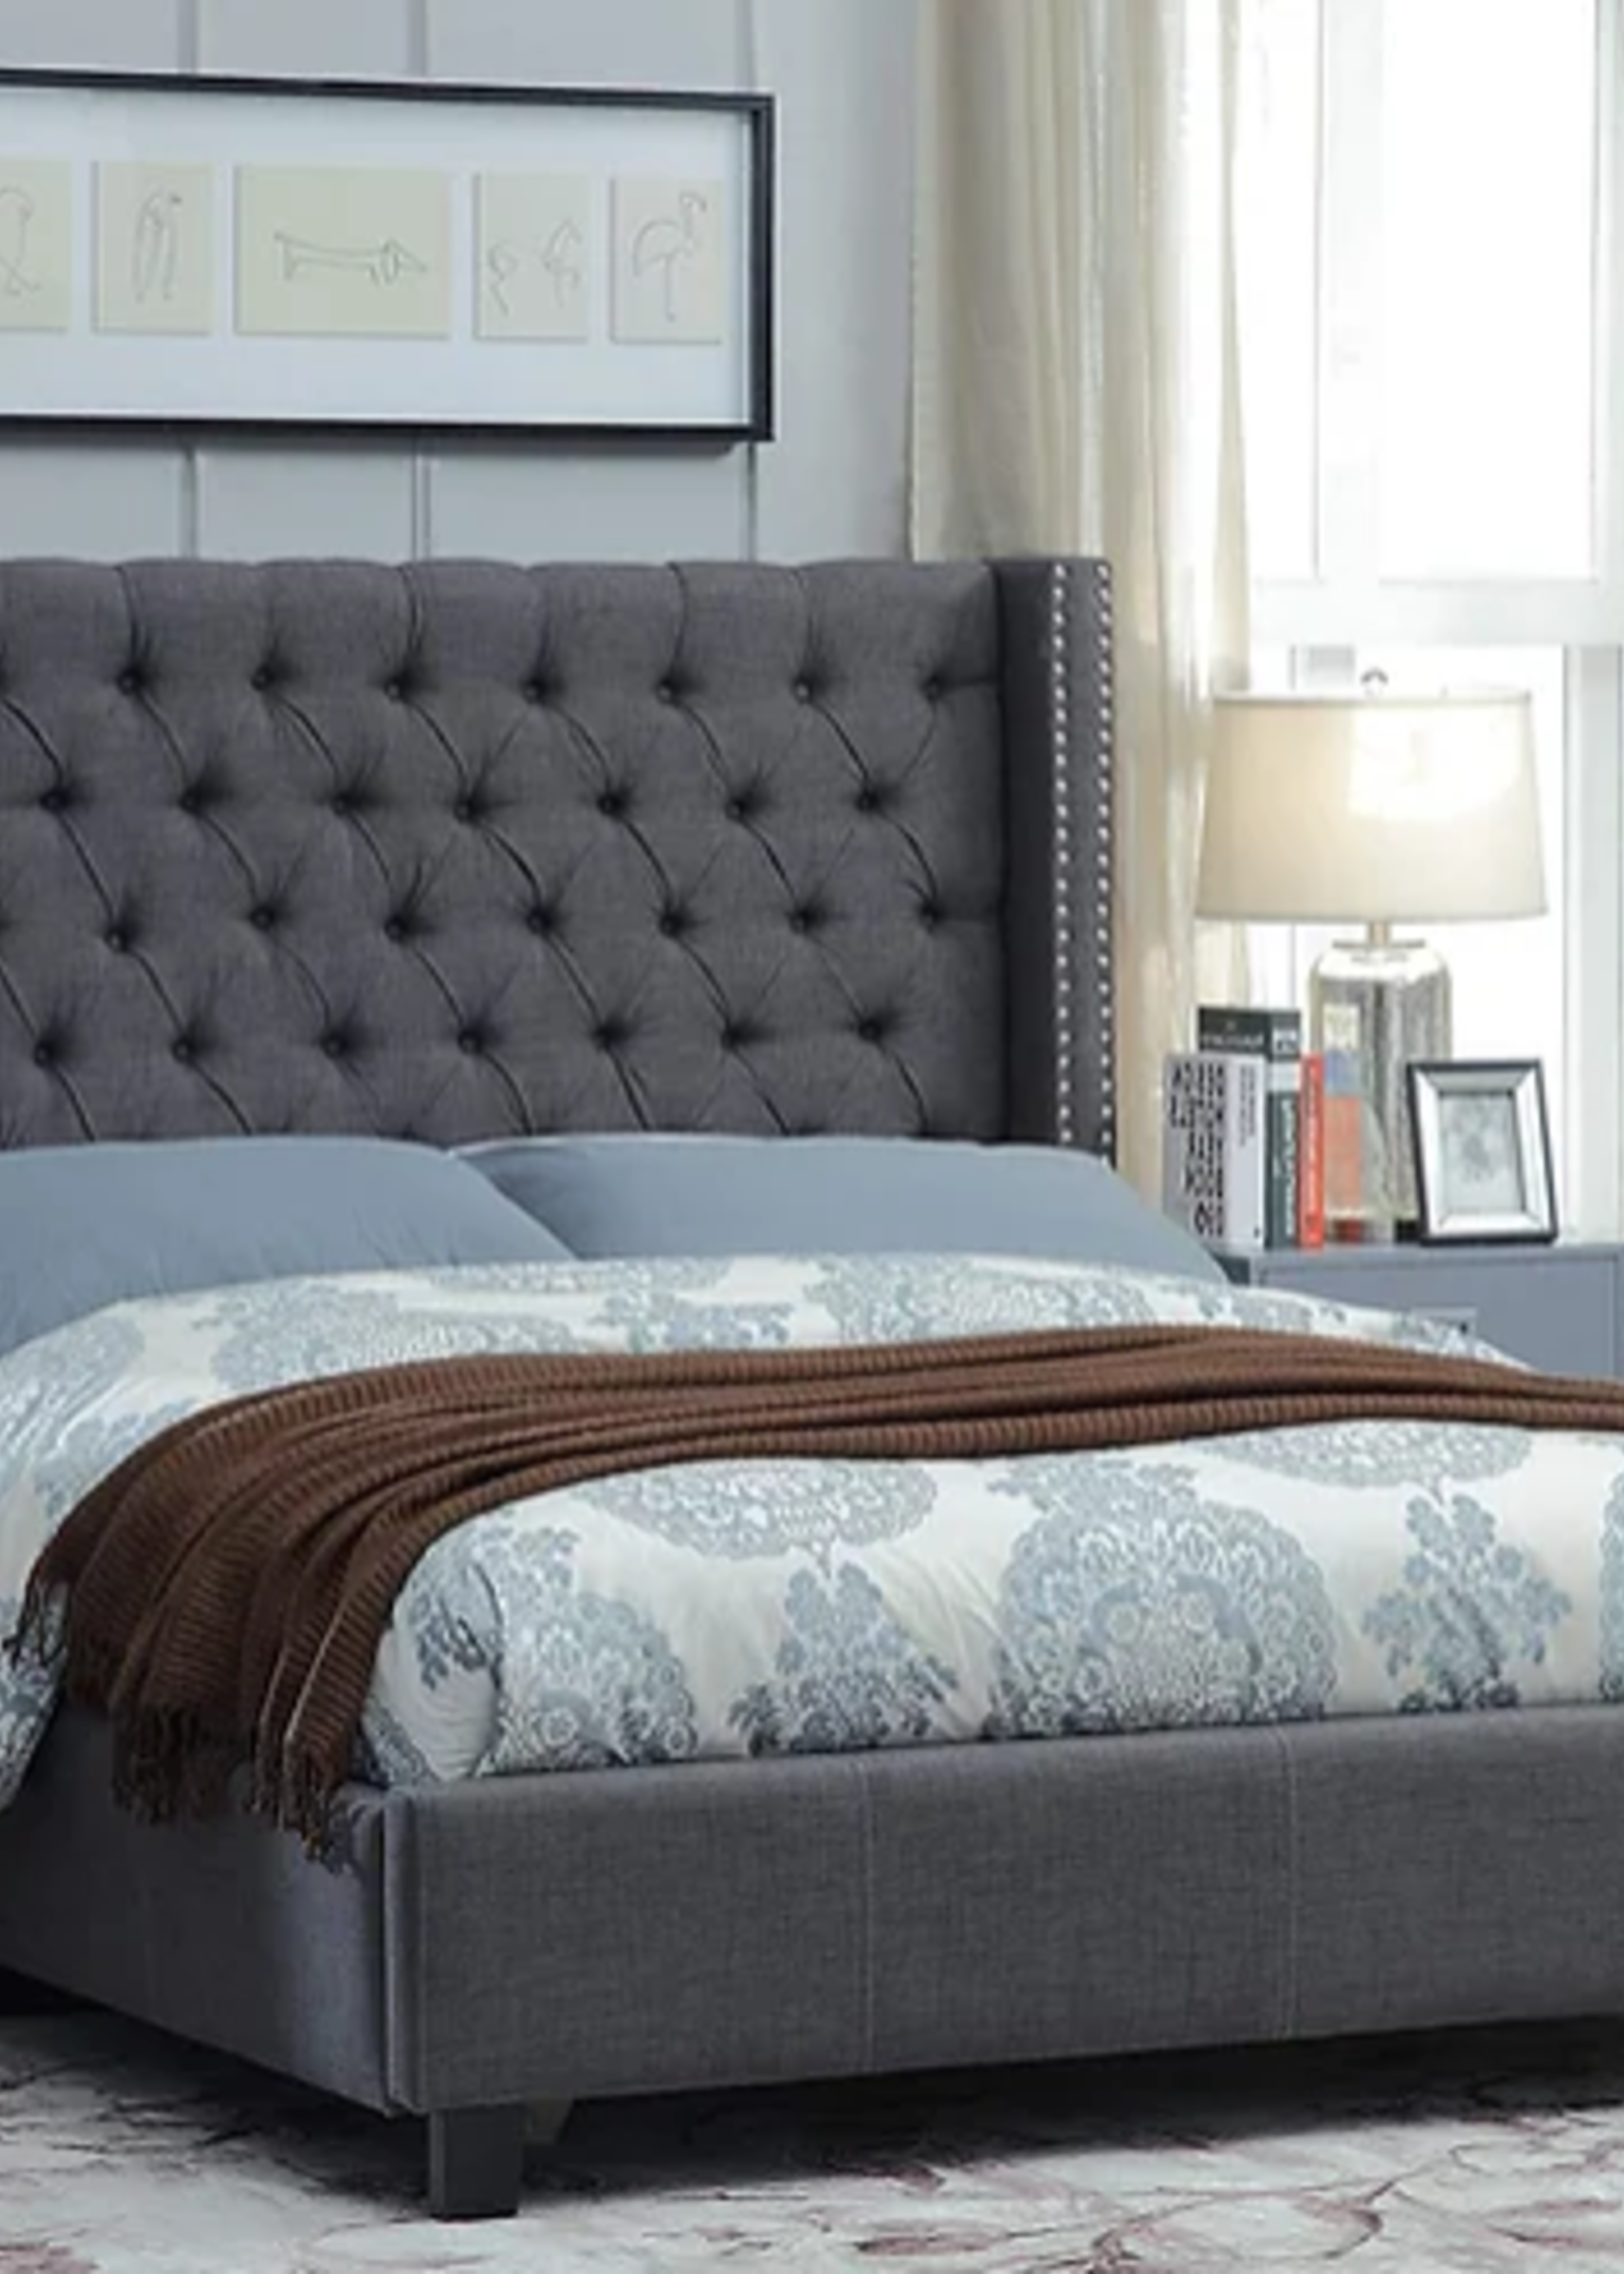 The Comox King Charcoal Grey Wing Bed Deep Button Tufting Nailhead Details